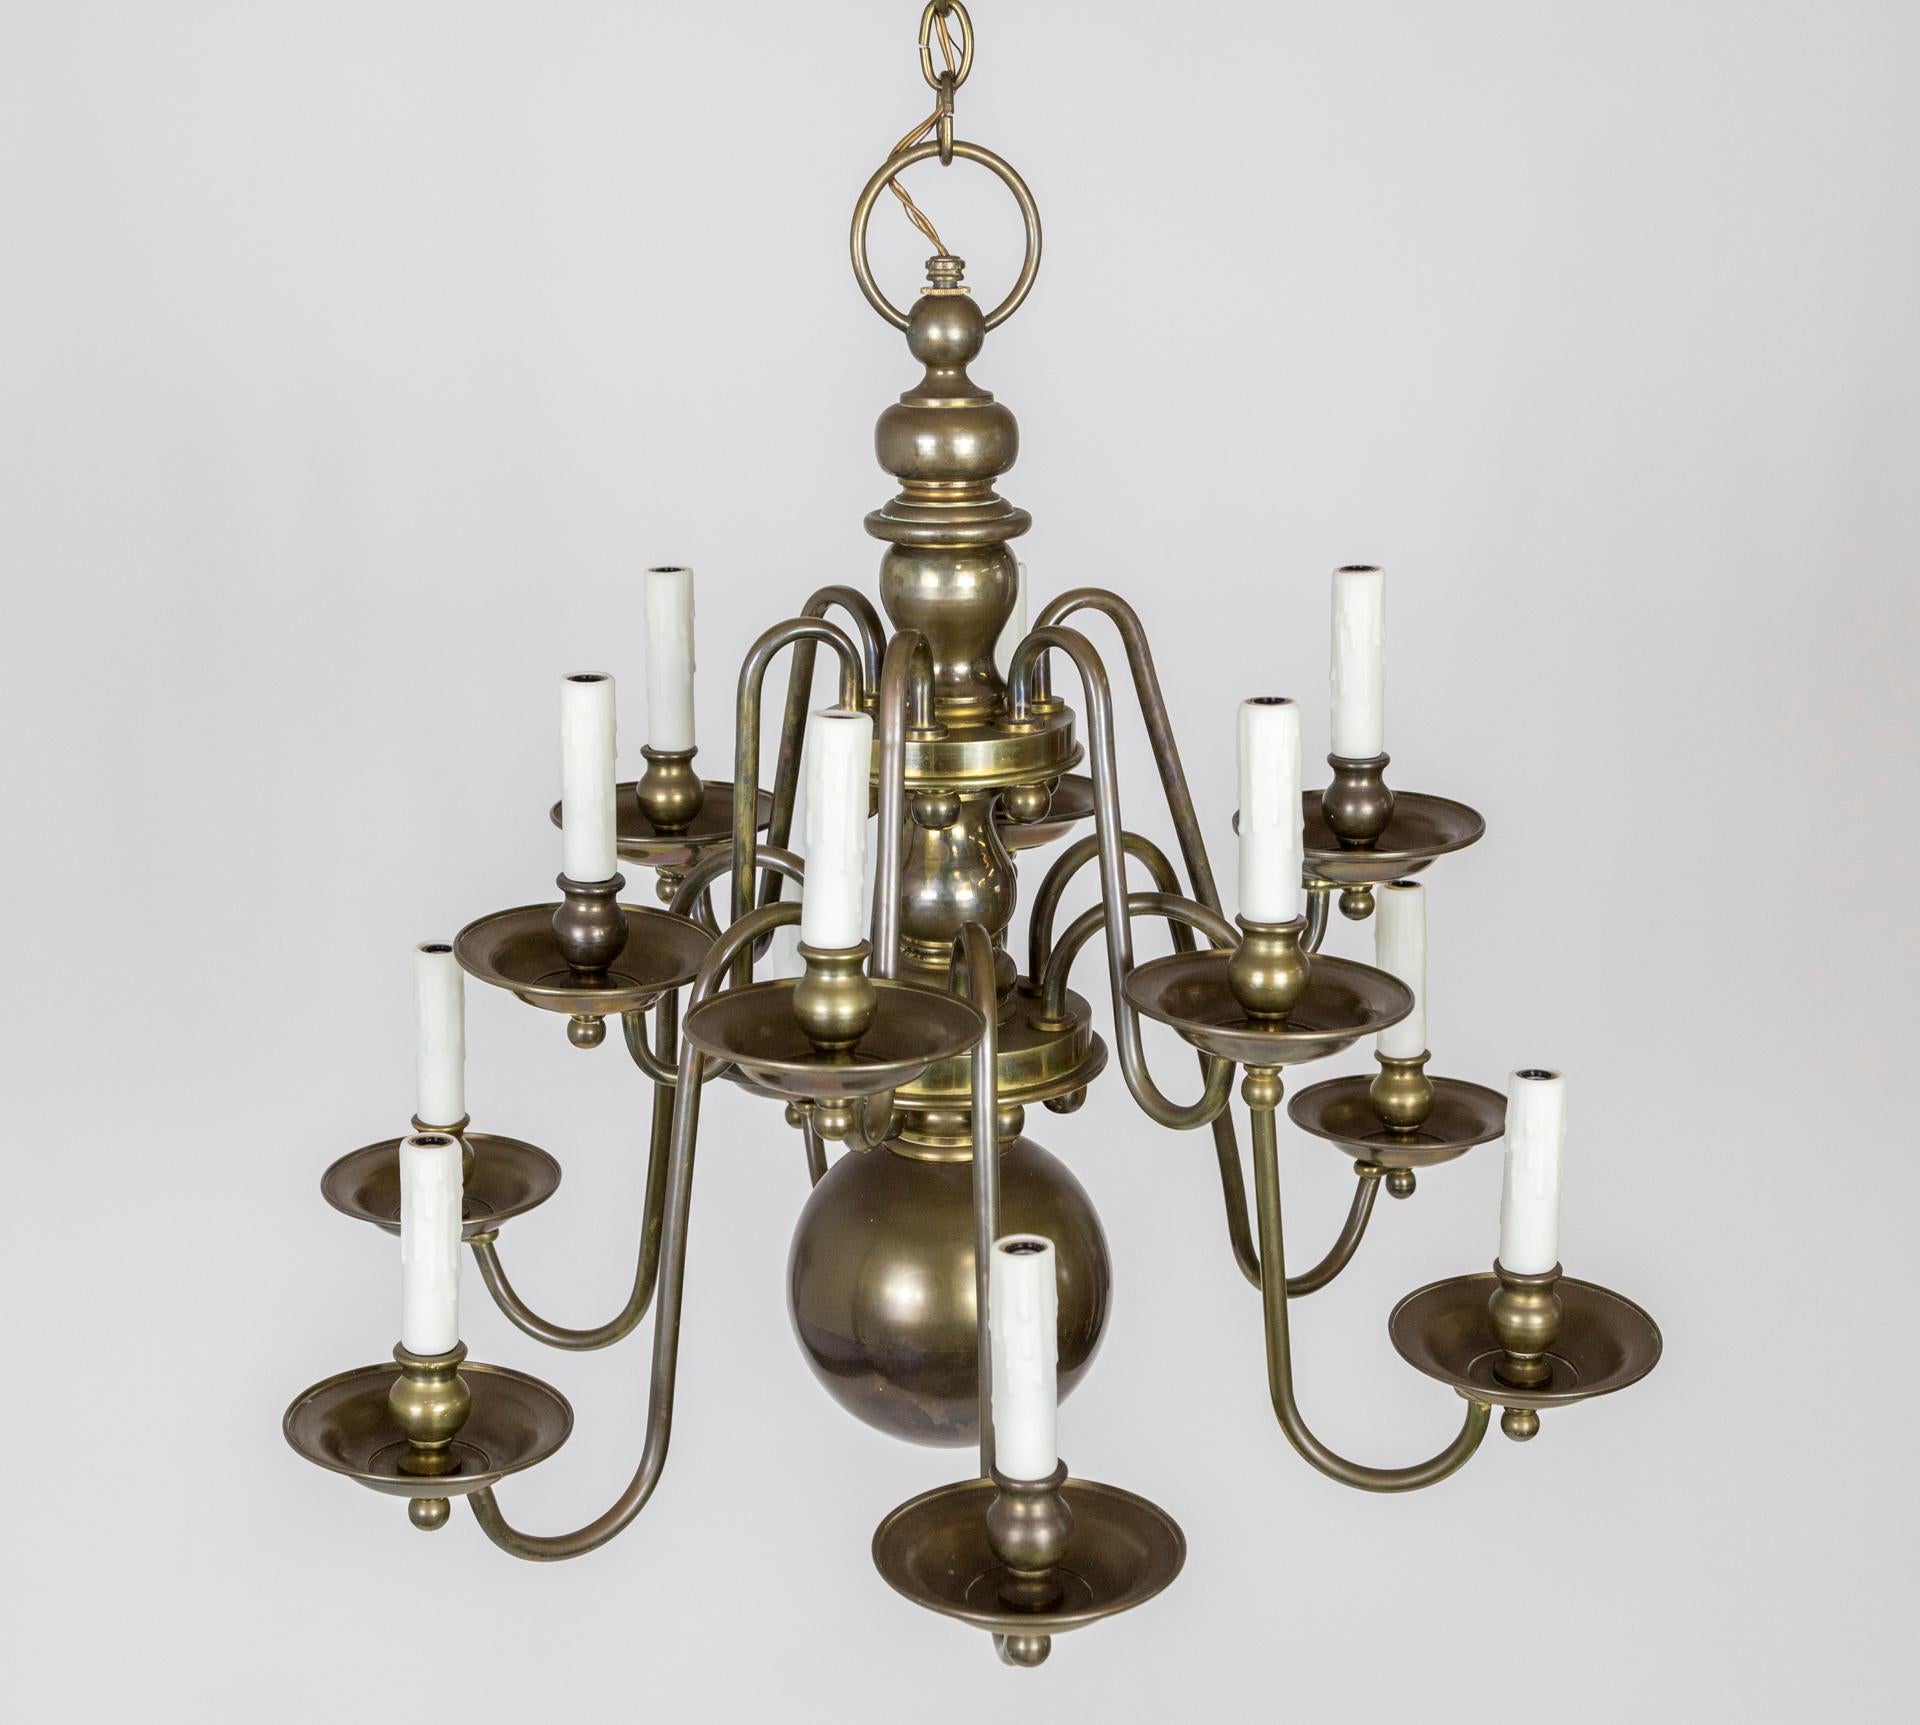 Dutch Baroque Style 2-Tier Aged Brass 12-Light Chandelier For Sale 1